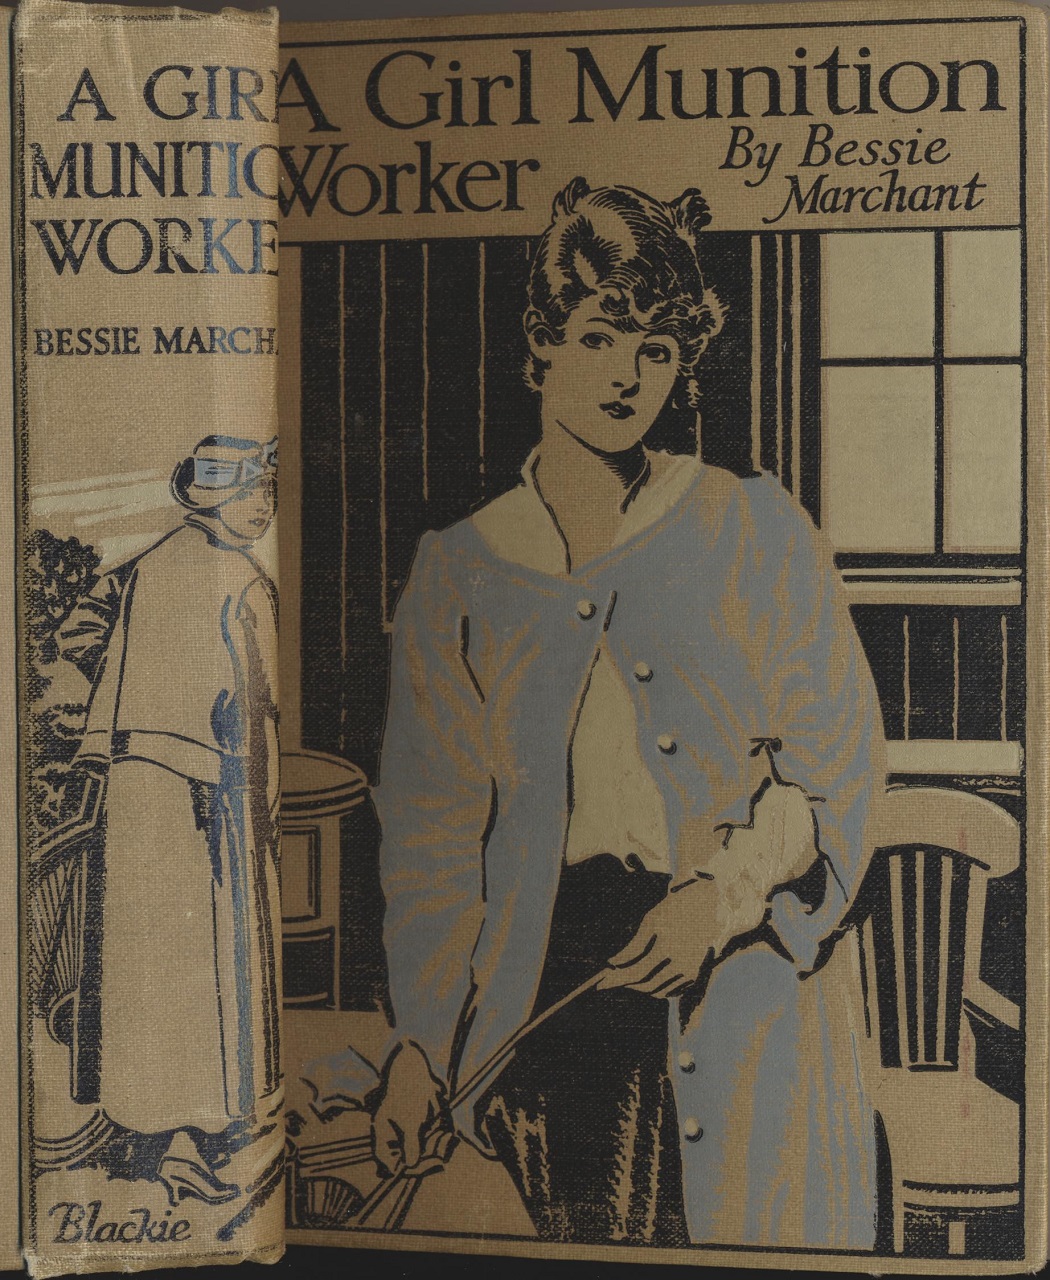 A Girl Munition Worker cover